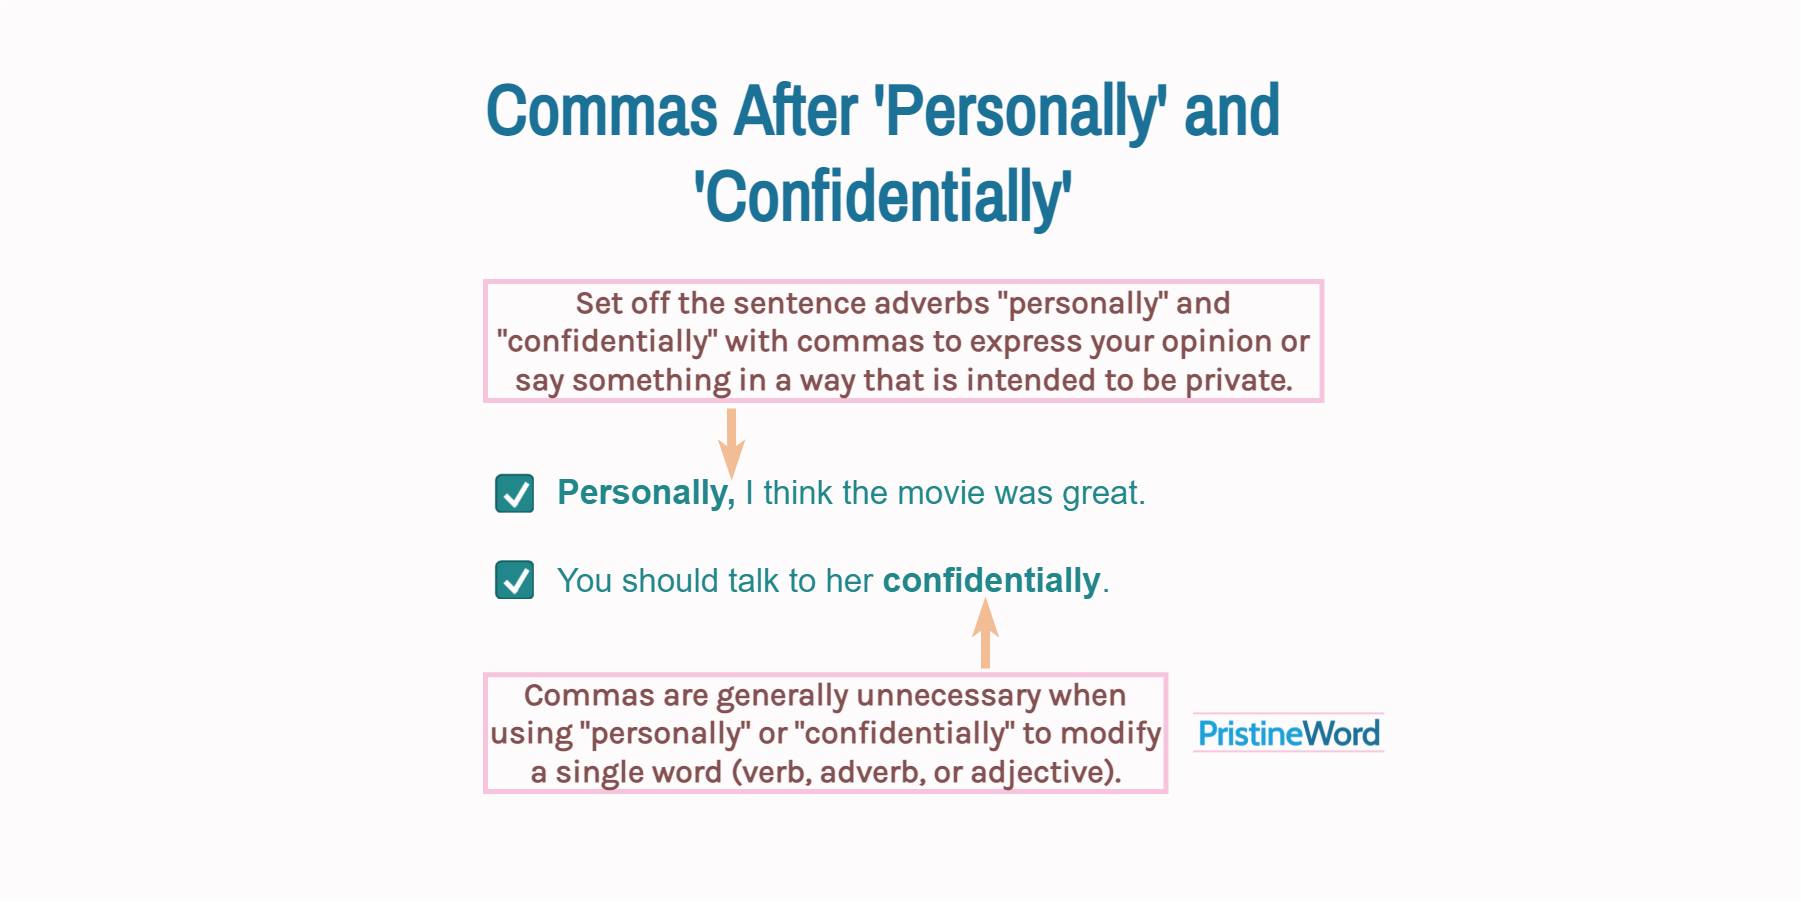 Commas After 'Personally' and 'Confidentially'